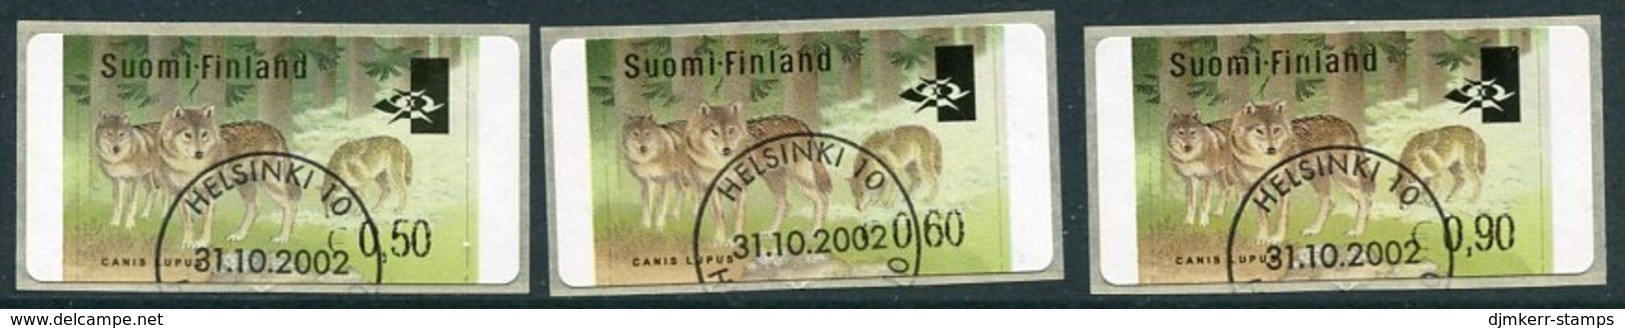 FINLAND 2002 Wolves ATM, Three Values Used.  Michel 38 - Automatenmarken [ATM]